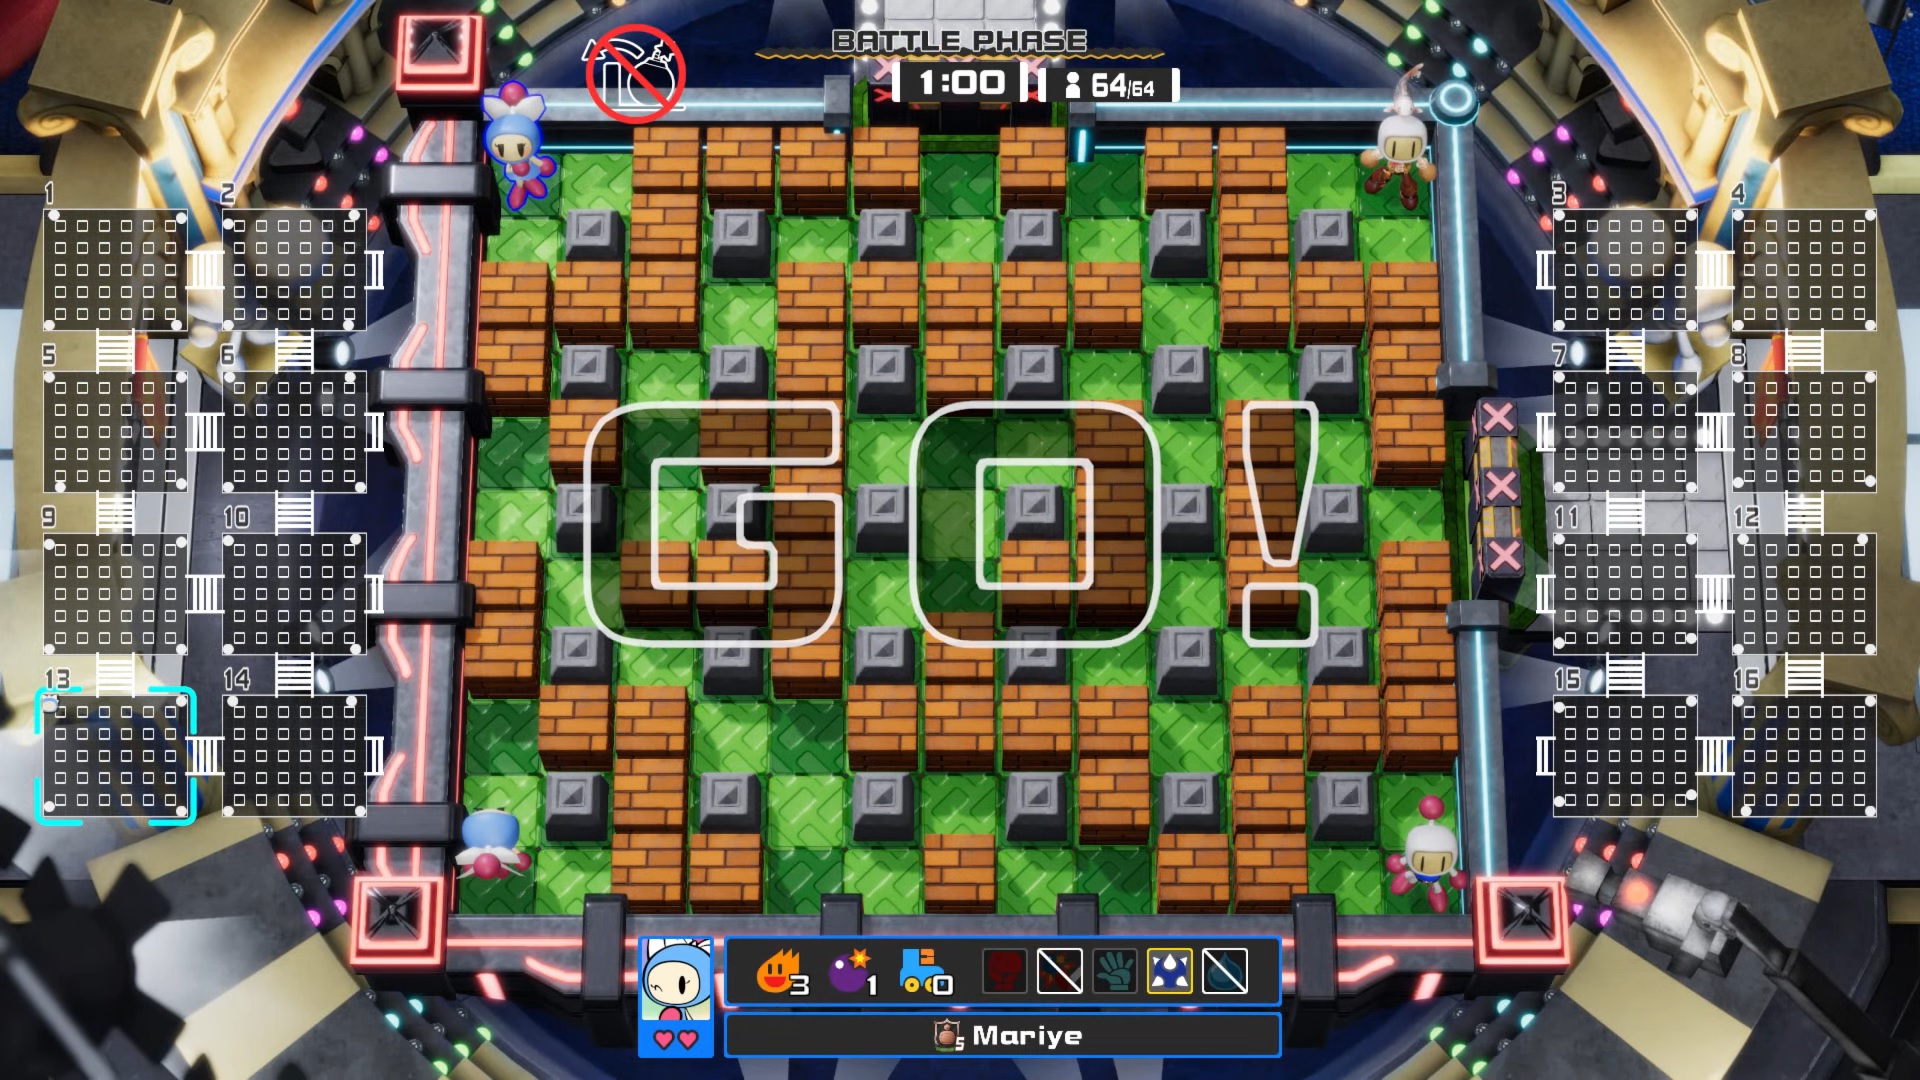 Super Bomberman R Online is now free-to-play on Stadia - 9to5Google